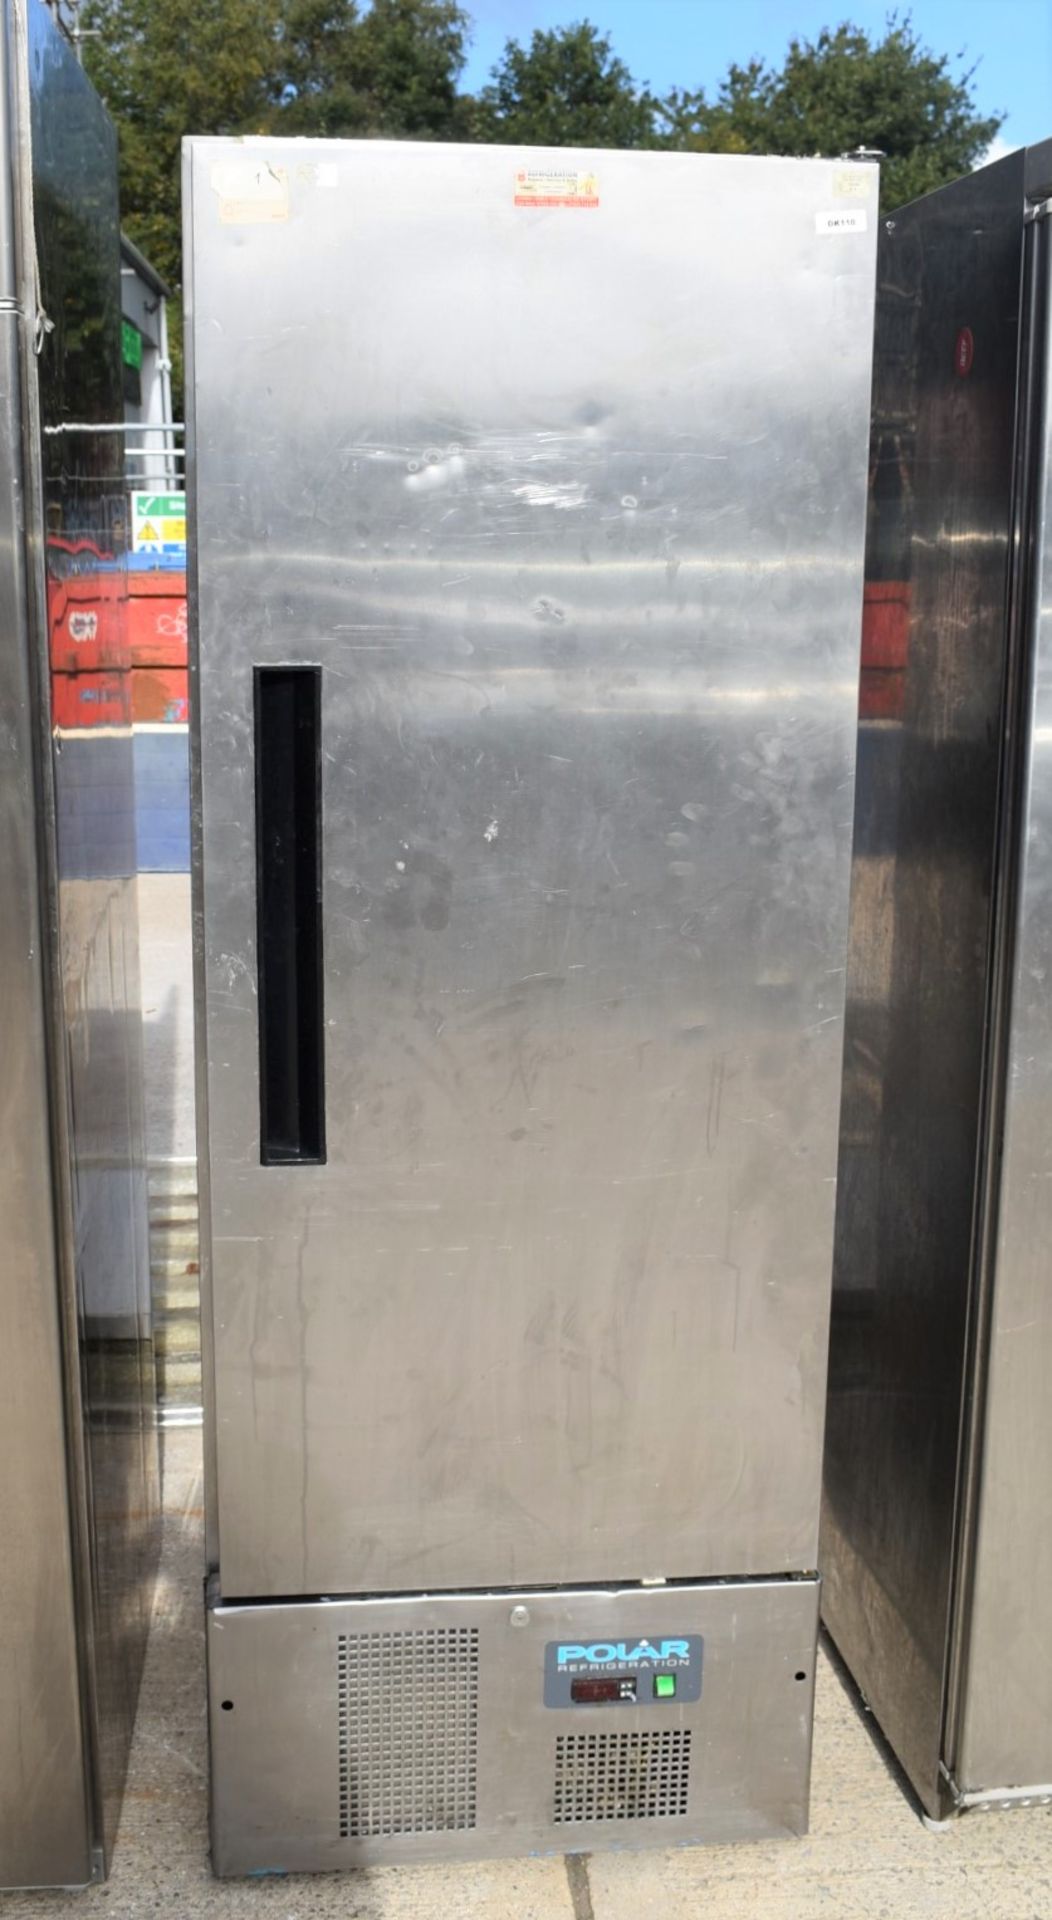 1 x Polar G590 Upright Commercial Fridge - Size: H188 x W65 x D70 cms - Recently Removed From a Dark